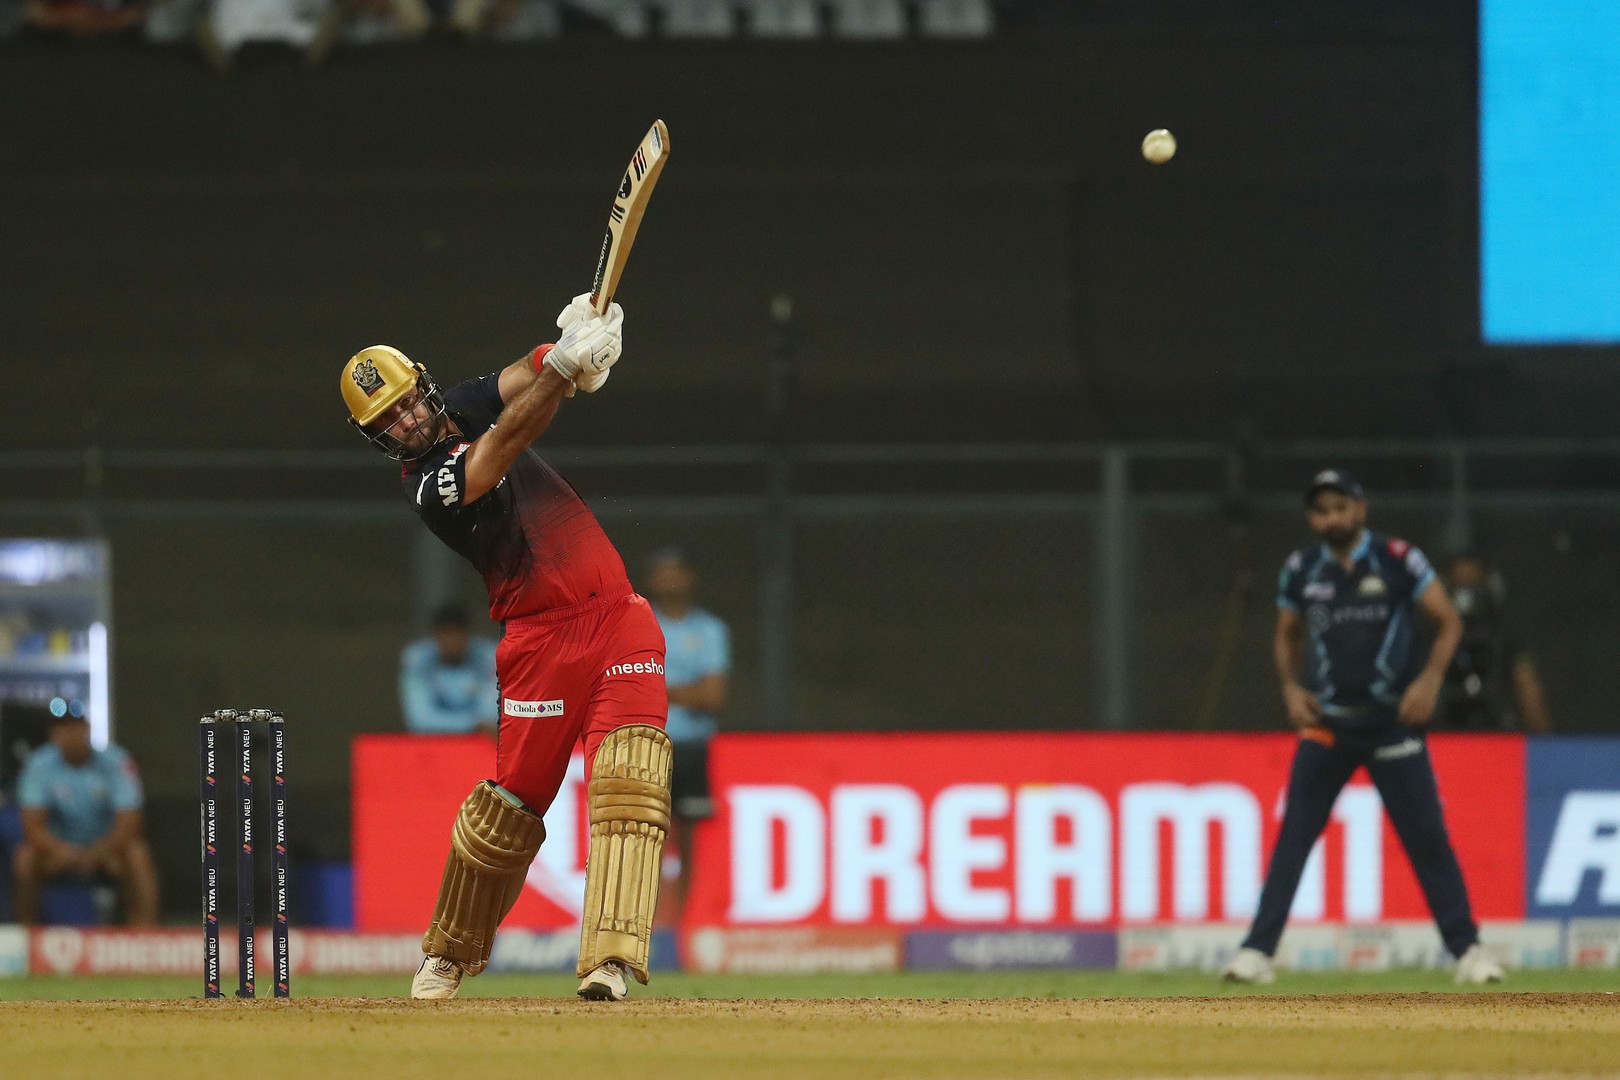 RCB VS GT, 19TH MAY, 2022, GAME 14 - 44